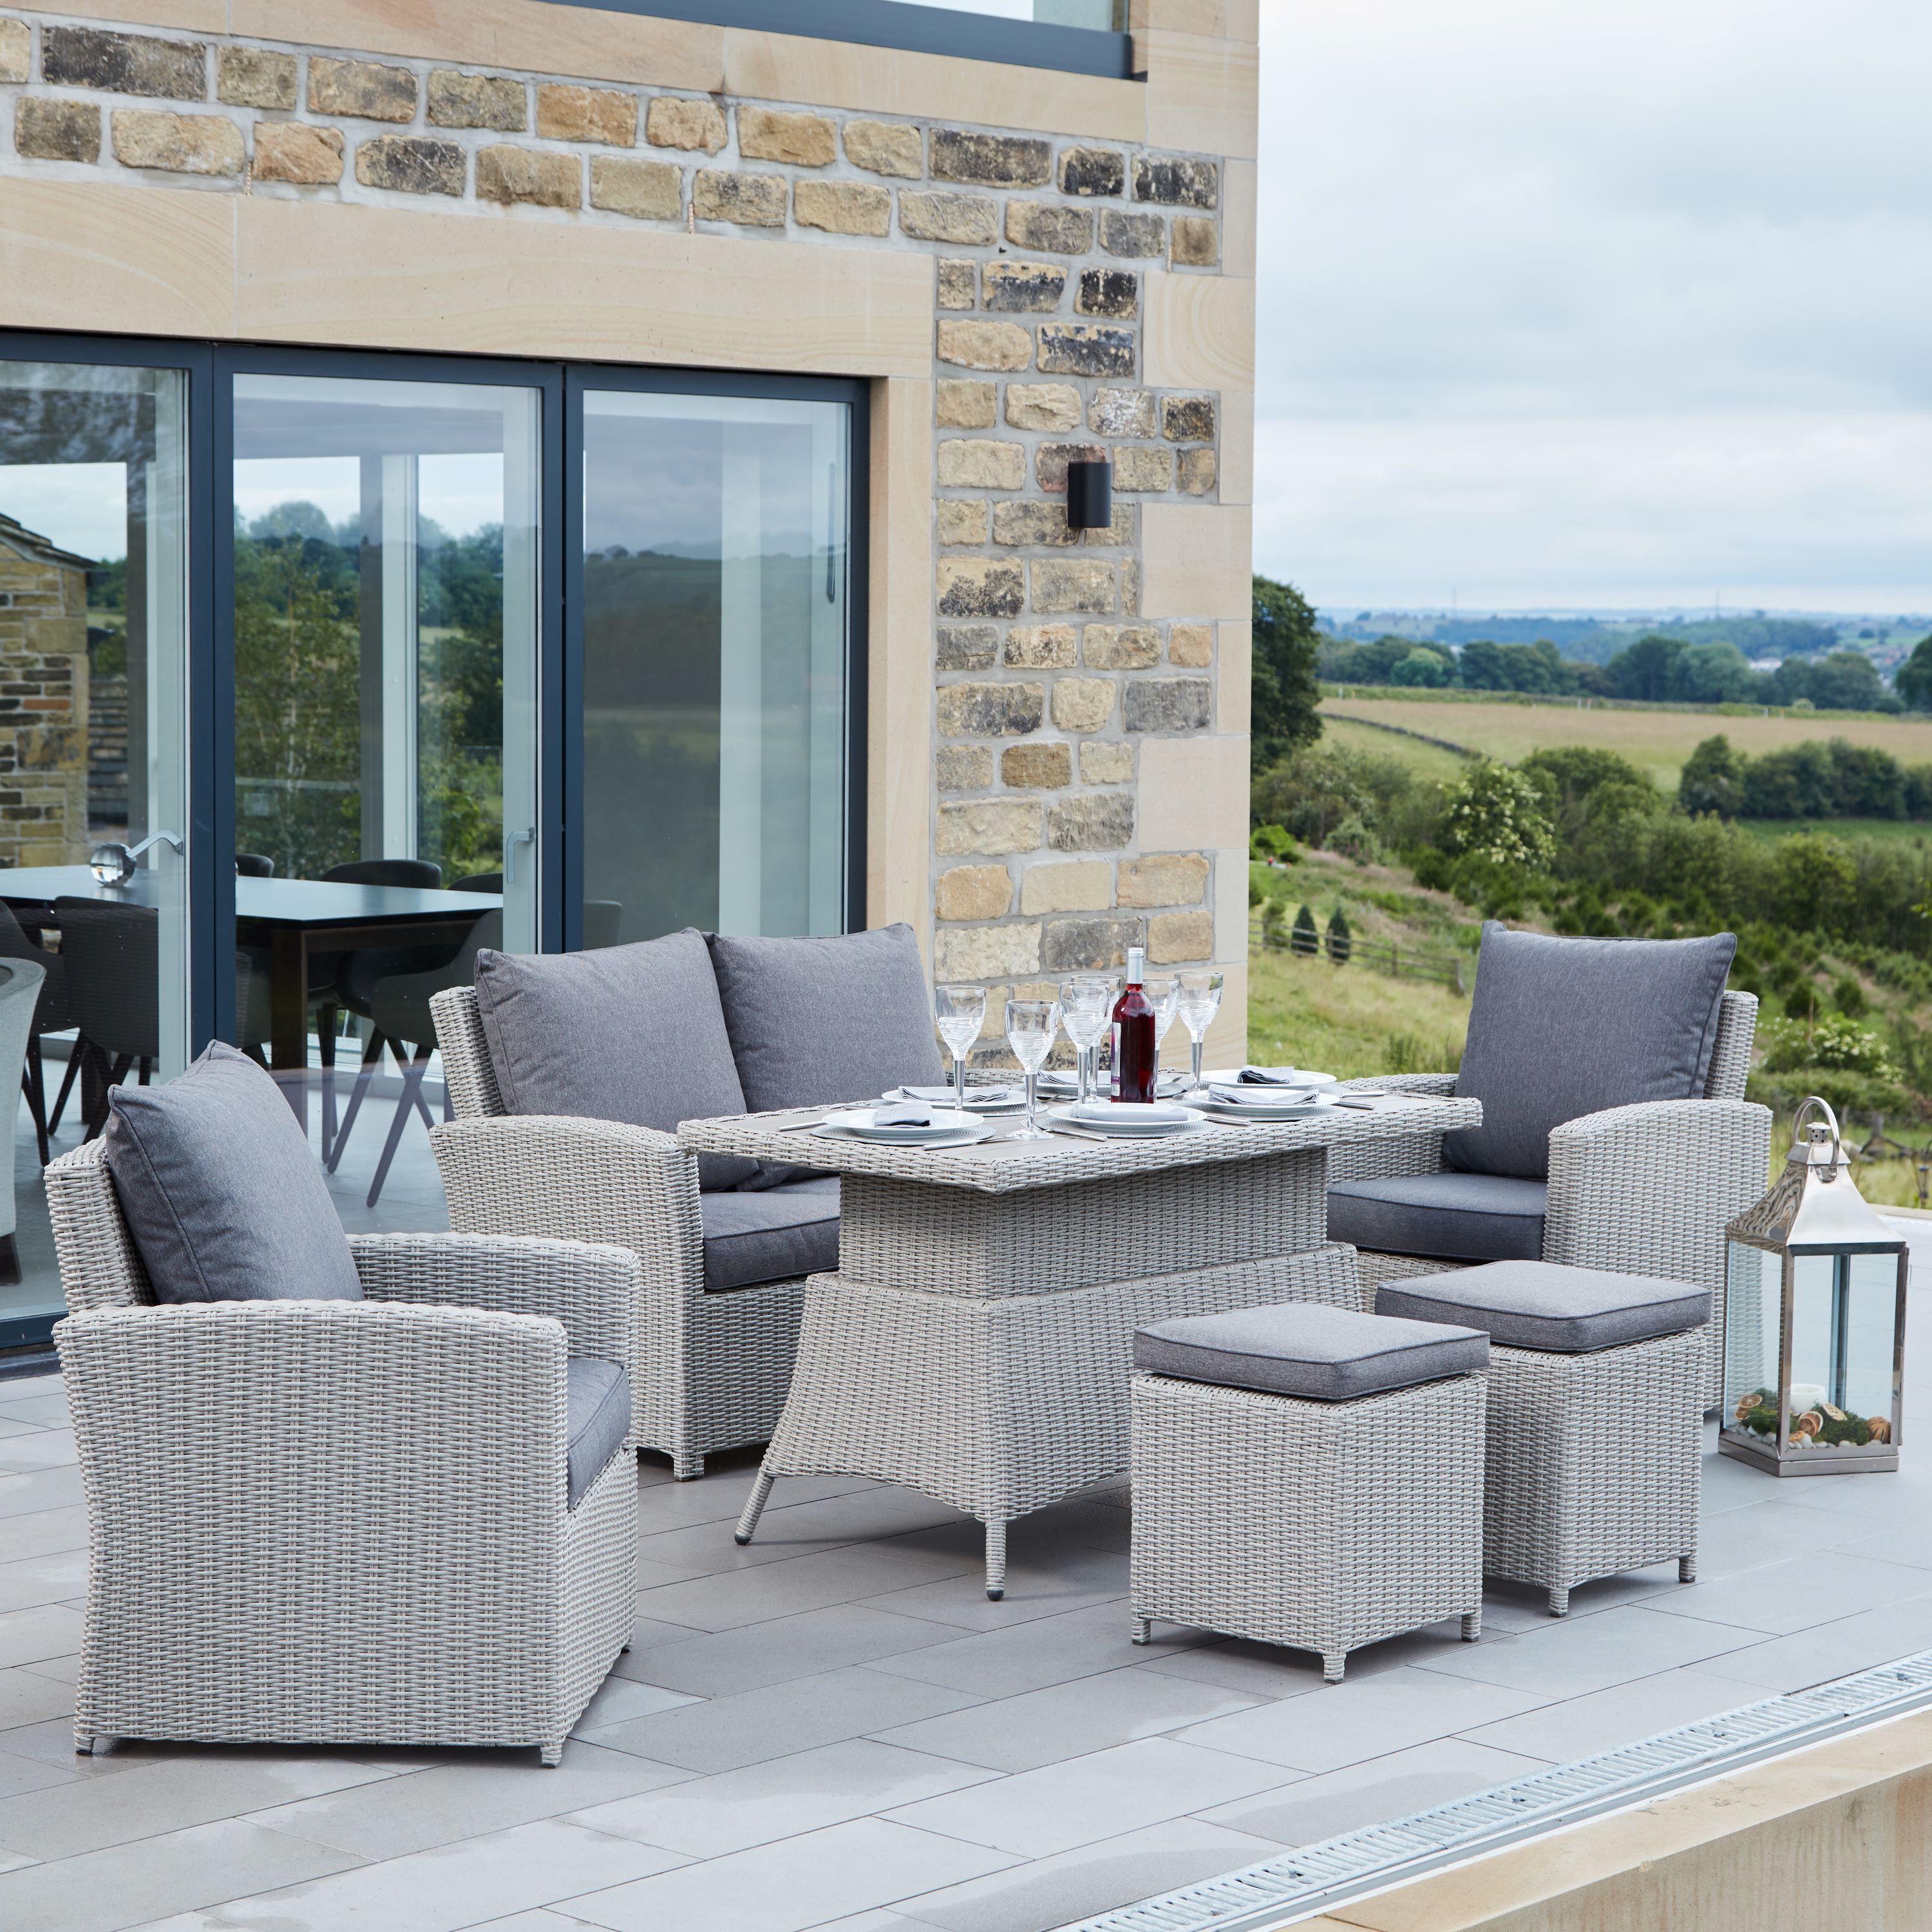 Barbados Slate Grey 6 Seater Lounge Set with Ceramic Top